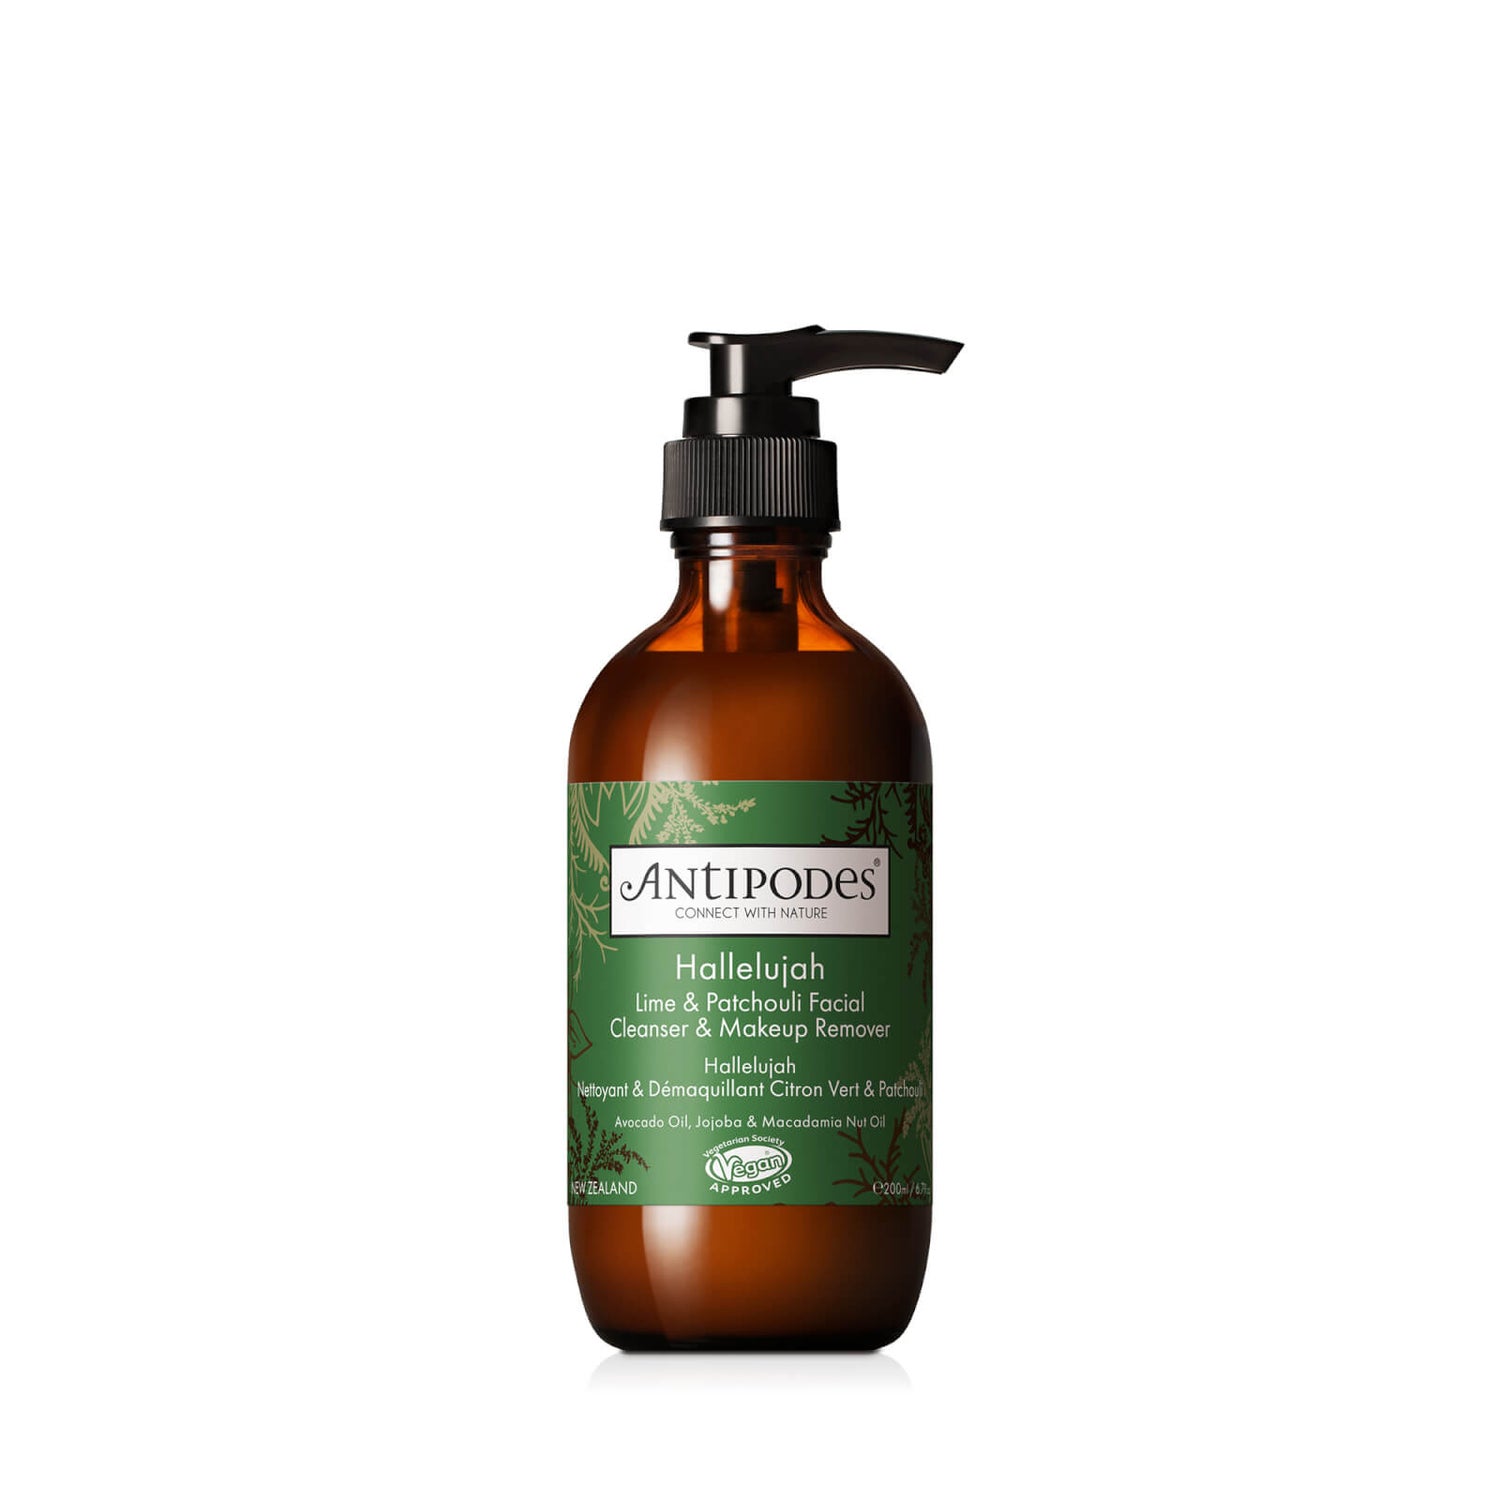 Antipodes Hallelujah Lime and Patchouli Hydrating Cleanser and Makeup Remover 200ml